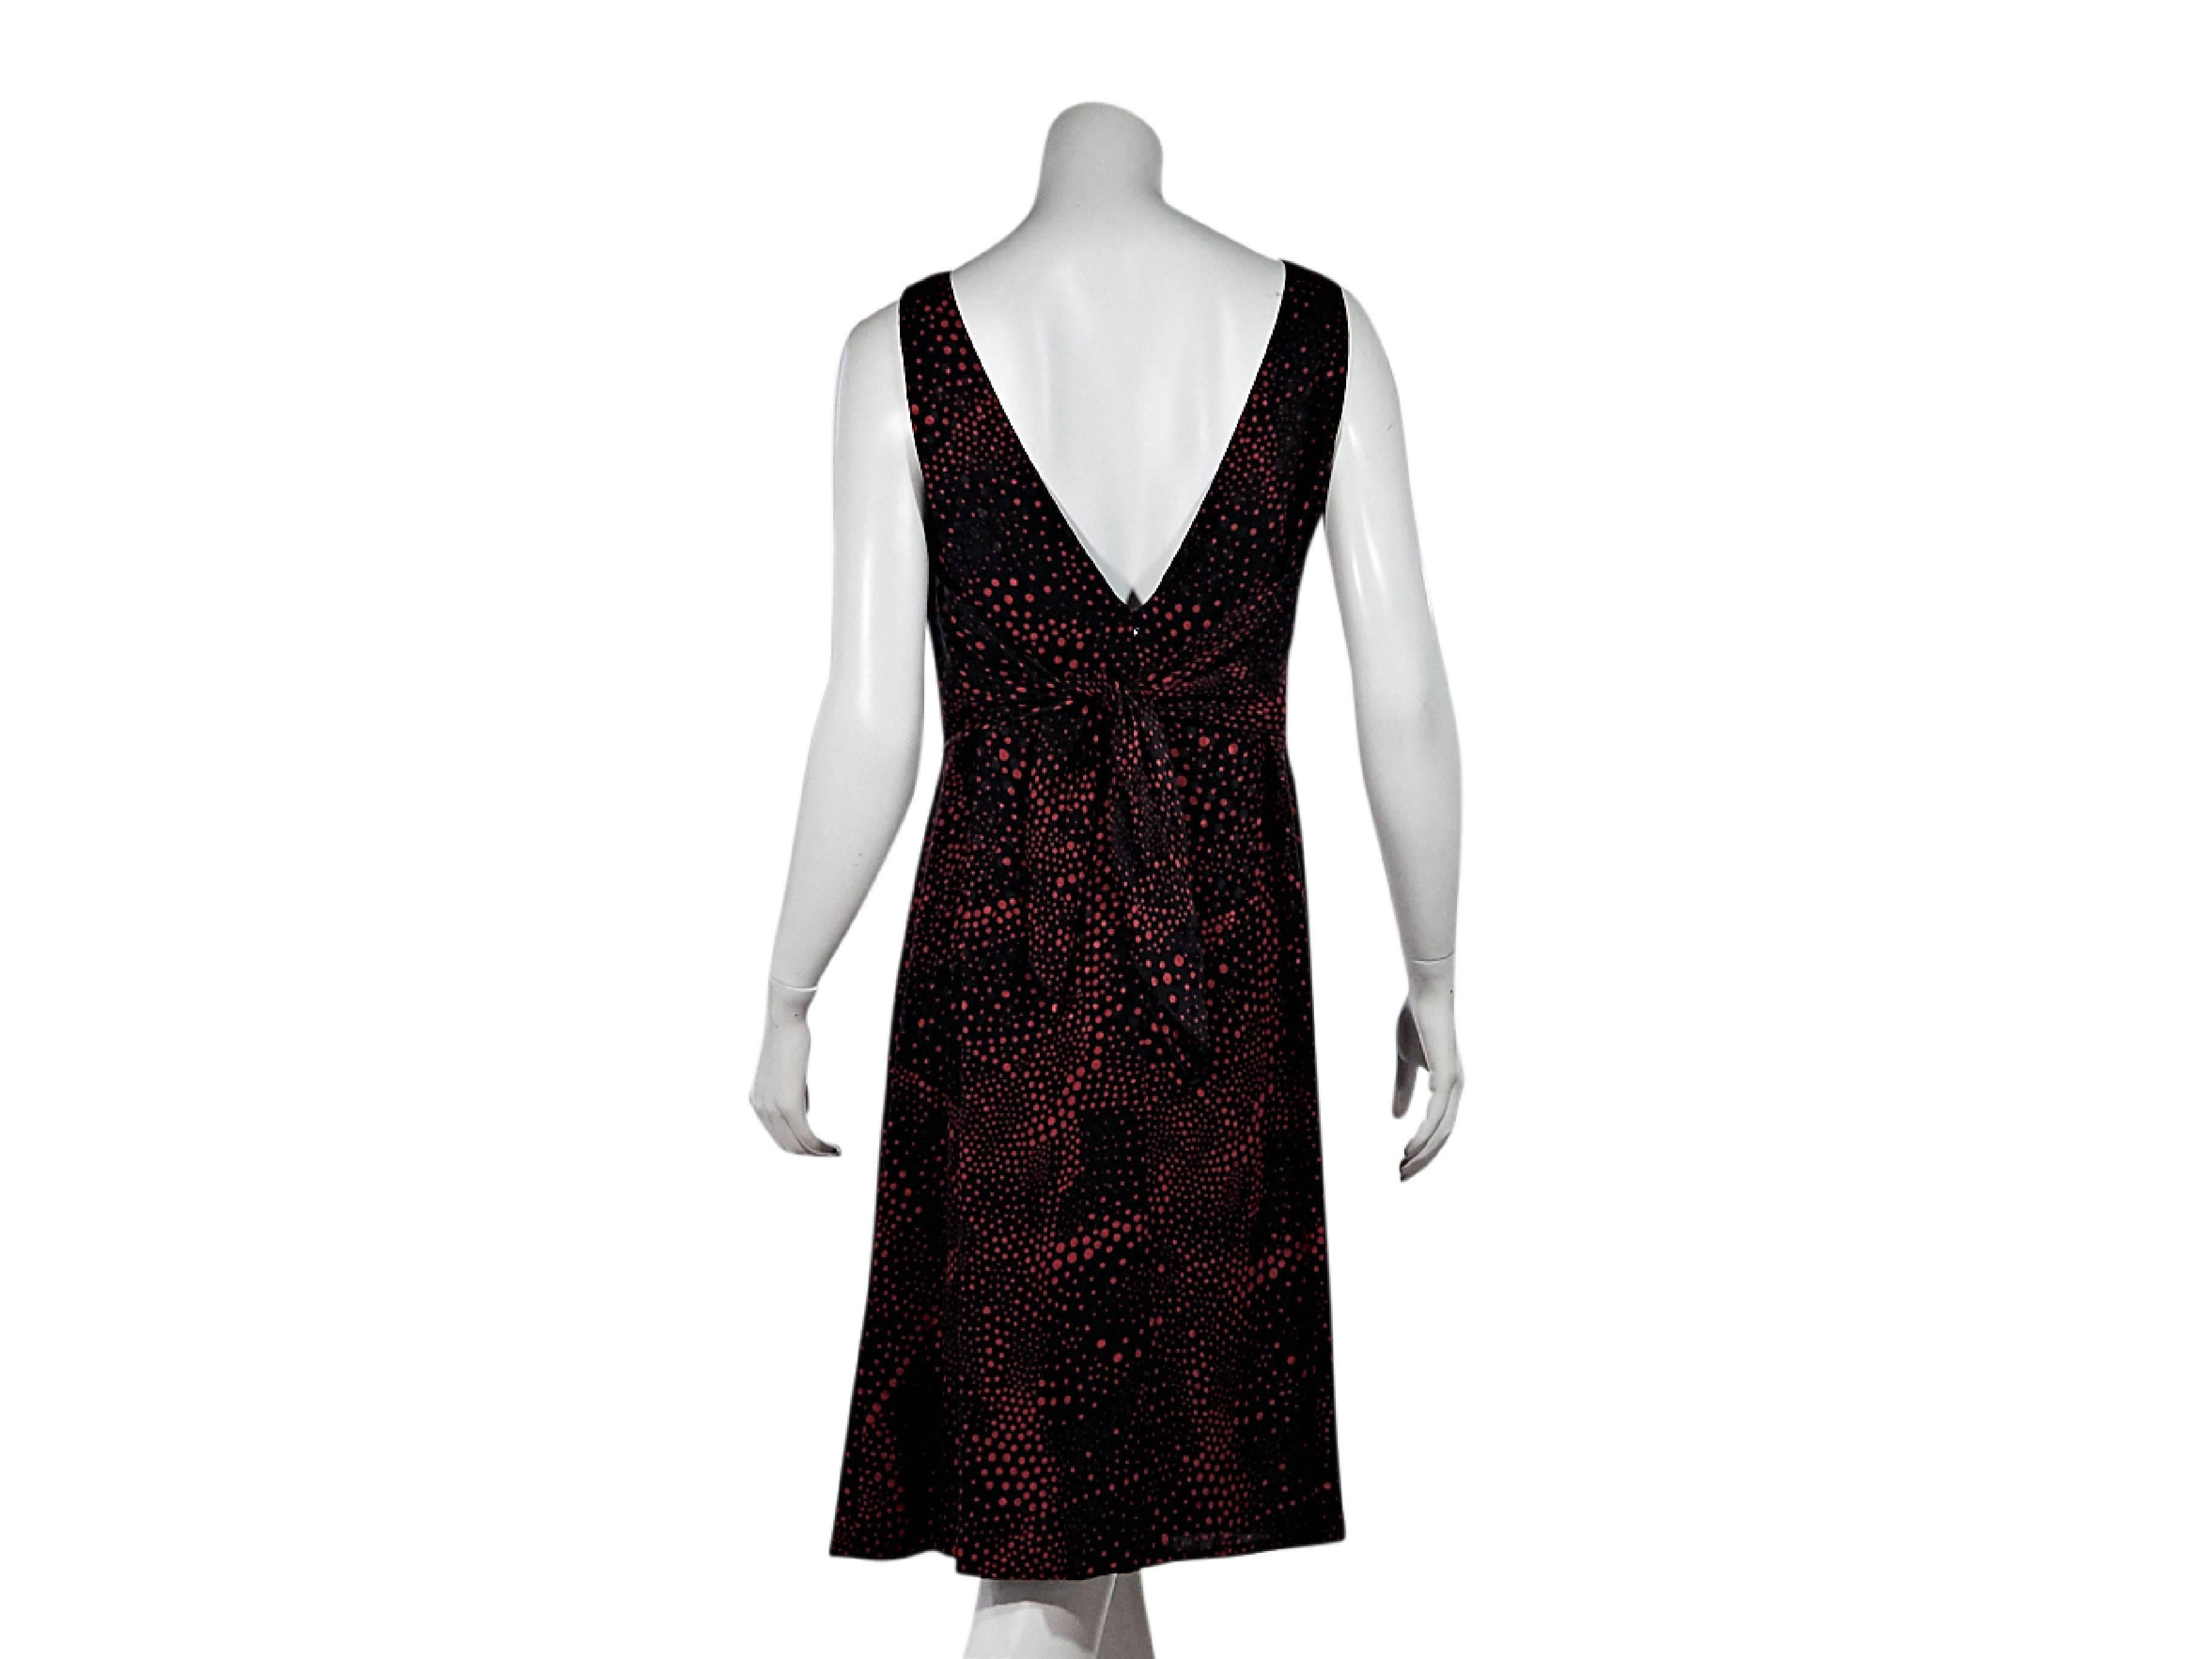 Product details: Black and red dot-printed dress by Escada. Boatneck. Sleeveless. V-back. Concealed back zip closure. Tie-back accent. 
Condition: Pre-owned. Very good.
Est. Retail: $ 698.00